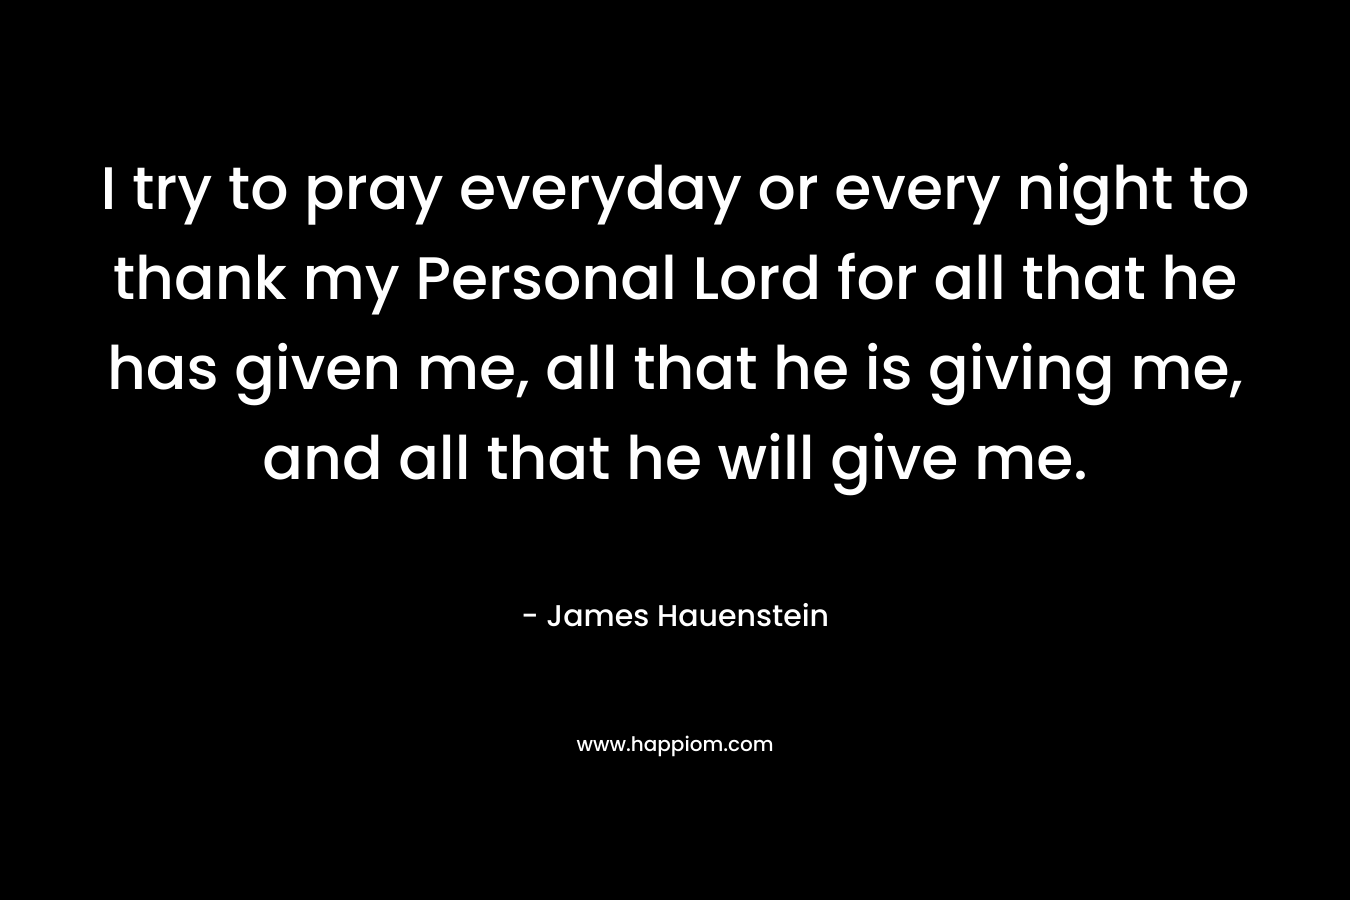 I try to pray everyday or every night to thank my Personal Lord for all that he has given me, all that he is giving me, and all that he will give me. – James Hauenstein